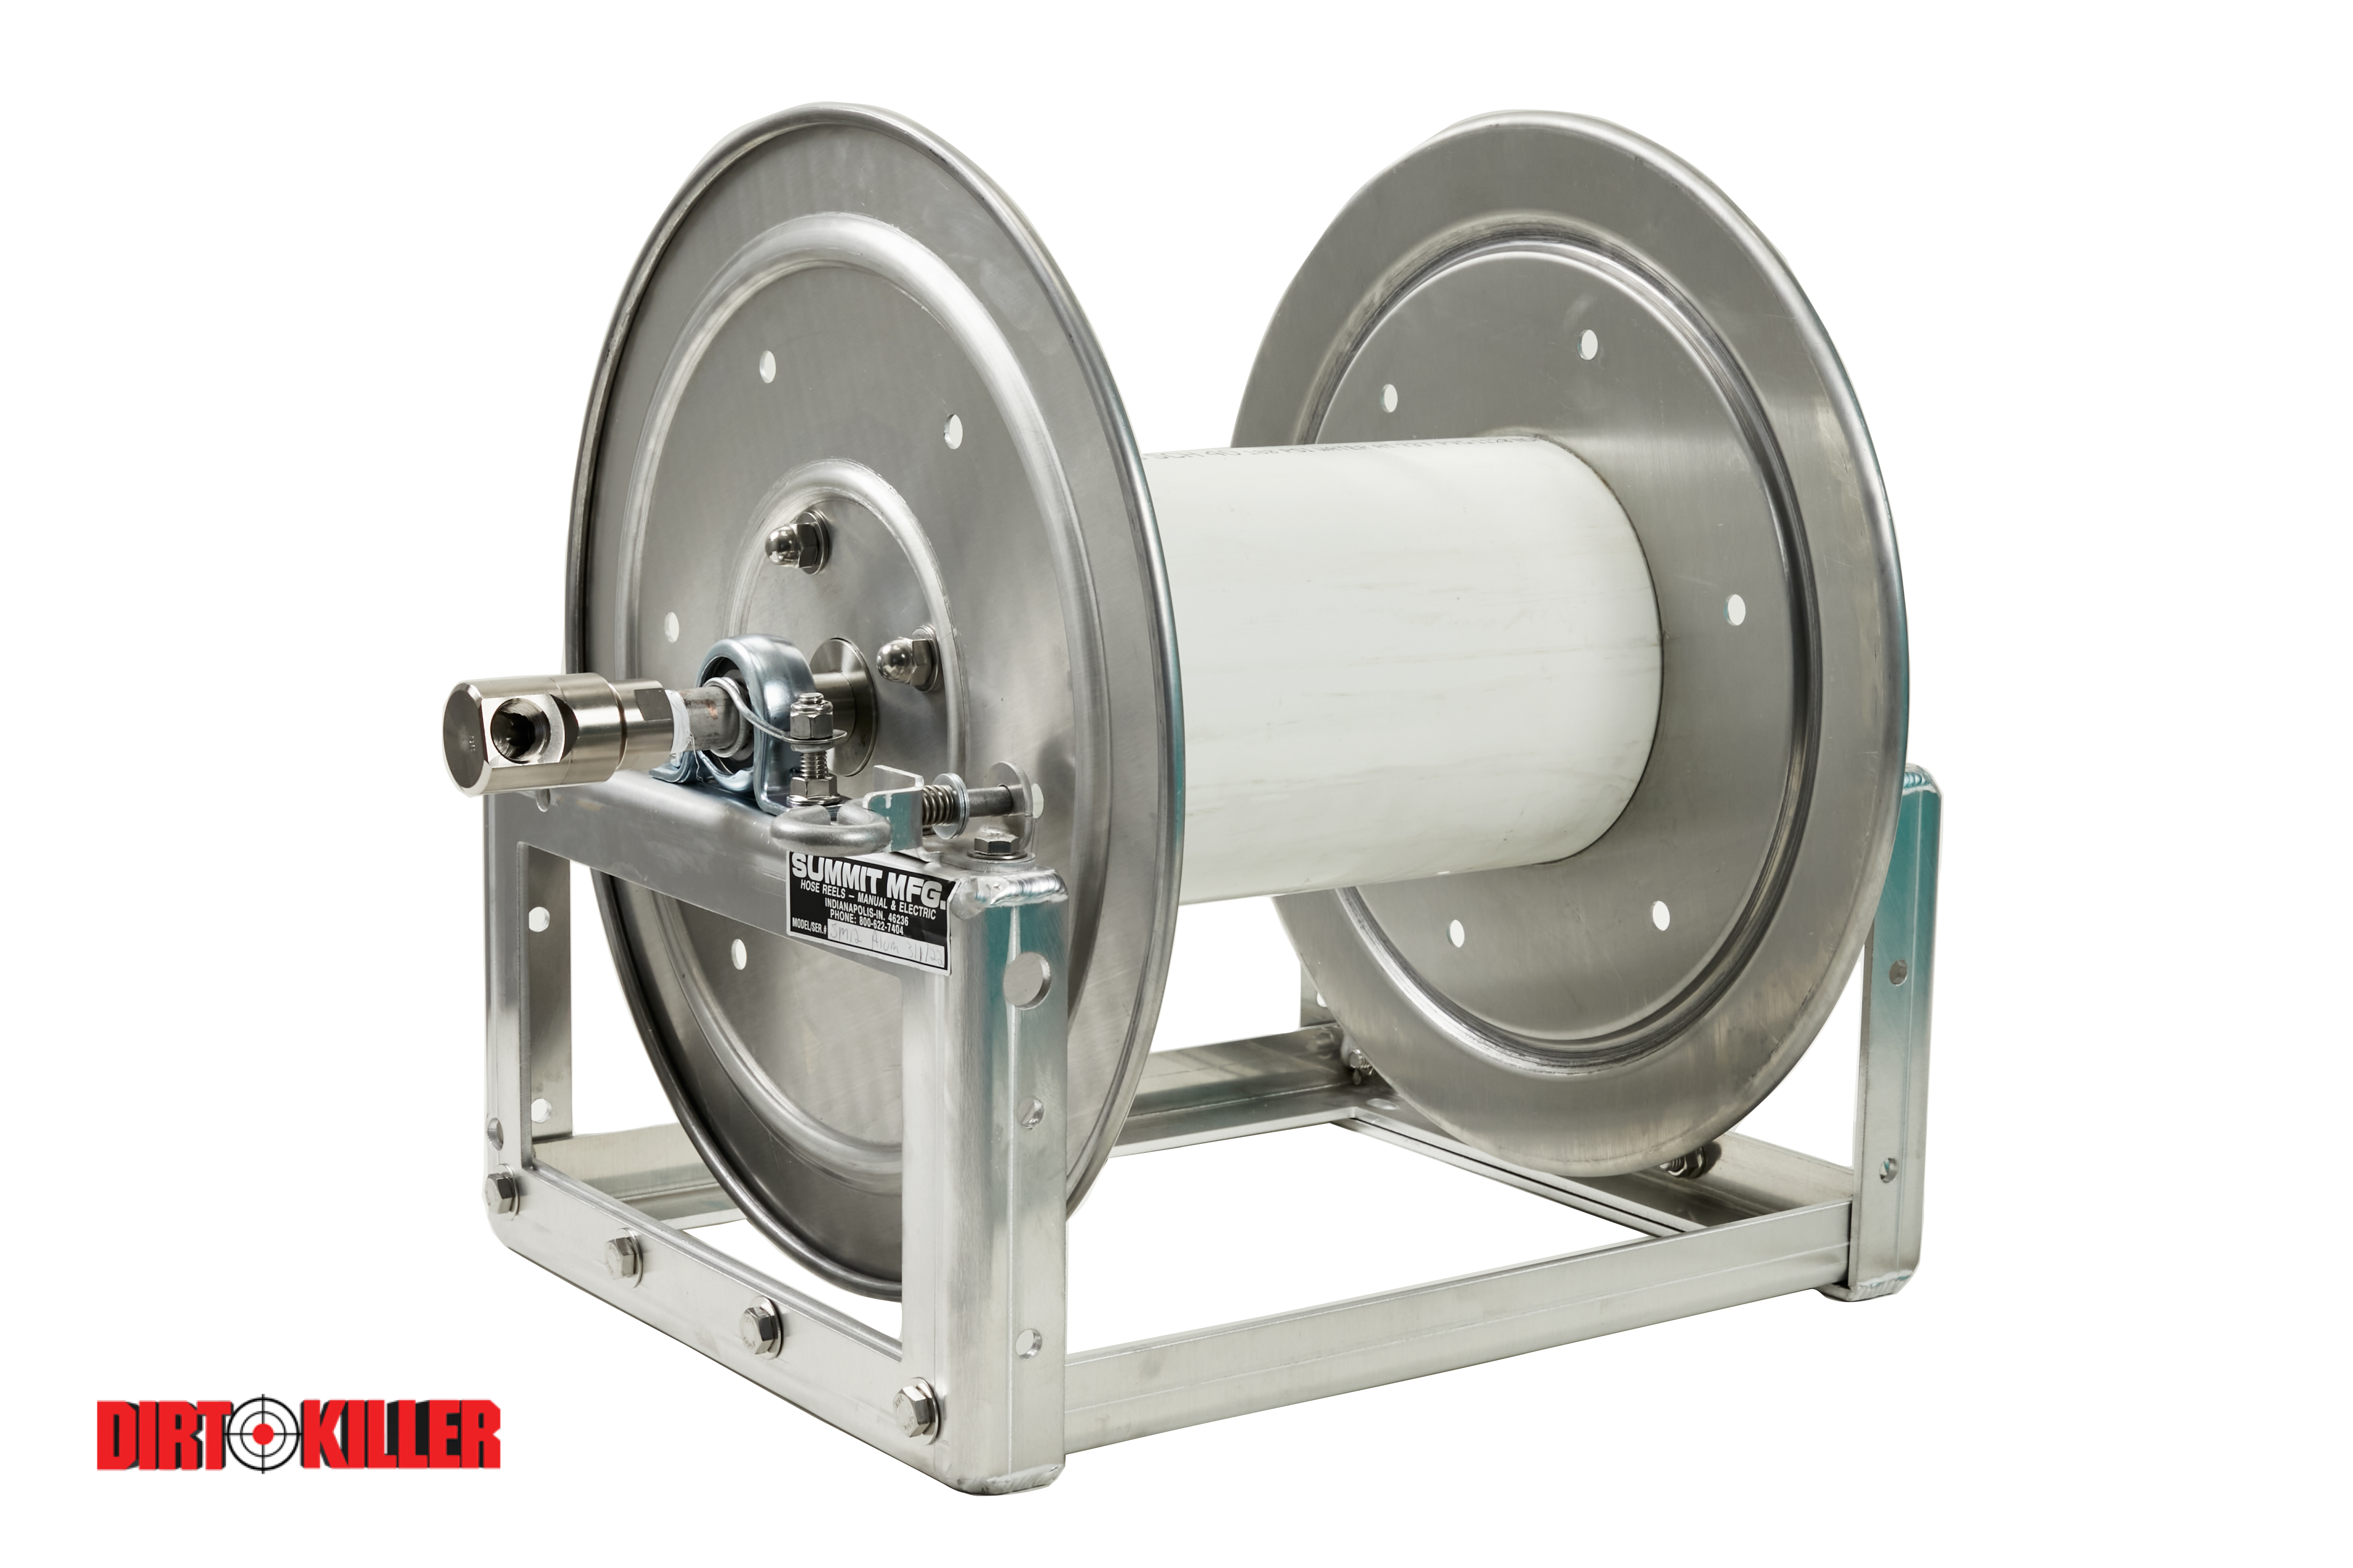 Summit Hose Reel SM12 Aluminum Externals With Stainless Manifold, Fits 200' of 1/2" Ag Hose